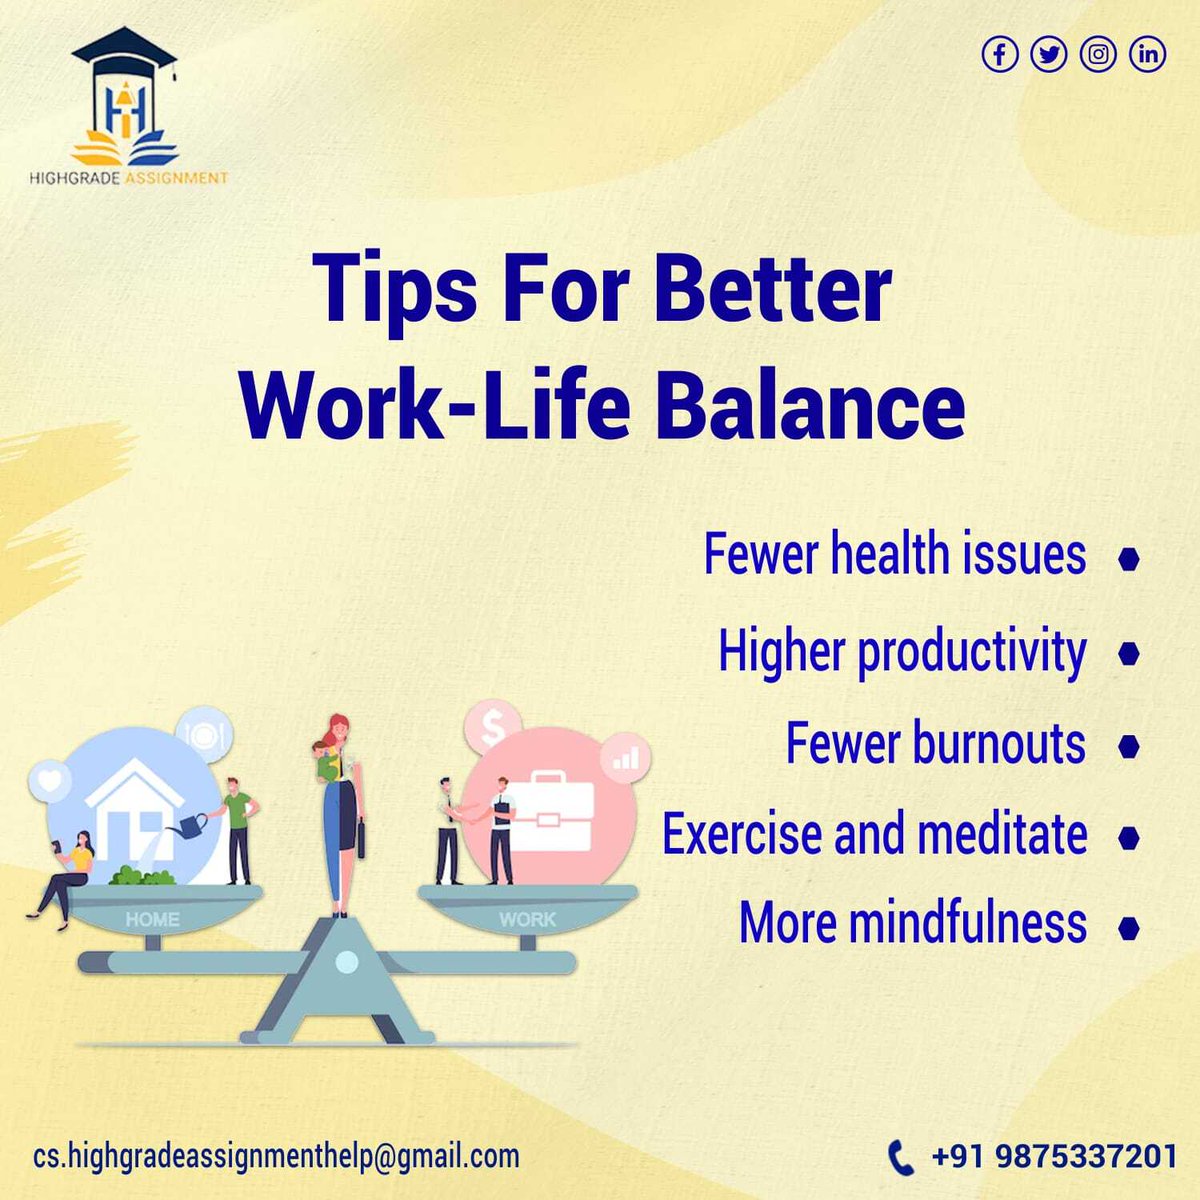 Whether you're a full-time student, part time employee or self-employed, it's important to have a work life balance.
.

#workplace #workspace #workmode #mindsetmattersmost #wealthymindset #changeyourmindset  #mindsetforgreatness #job #jobs #work #joblife #worklife #career